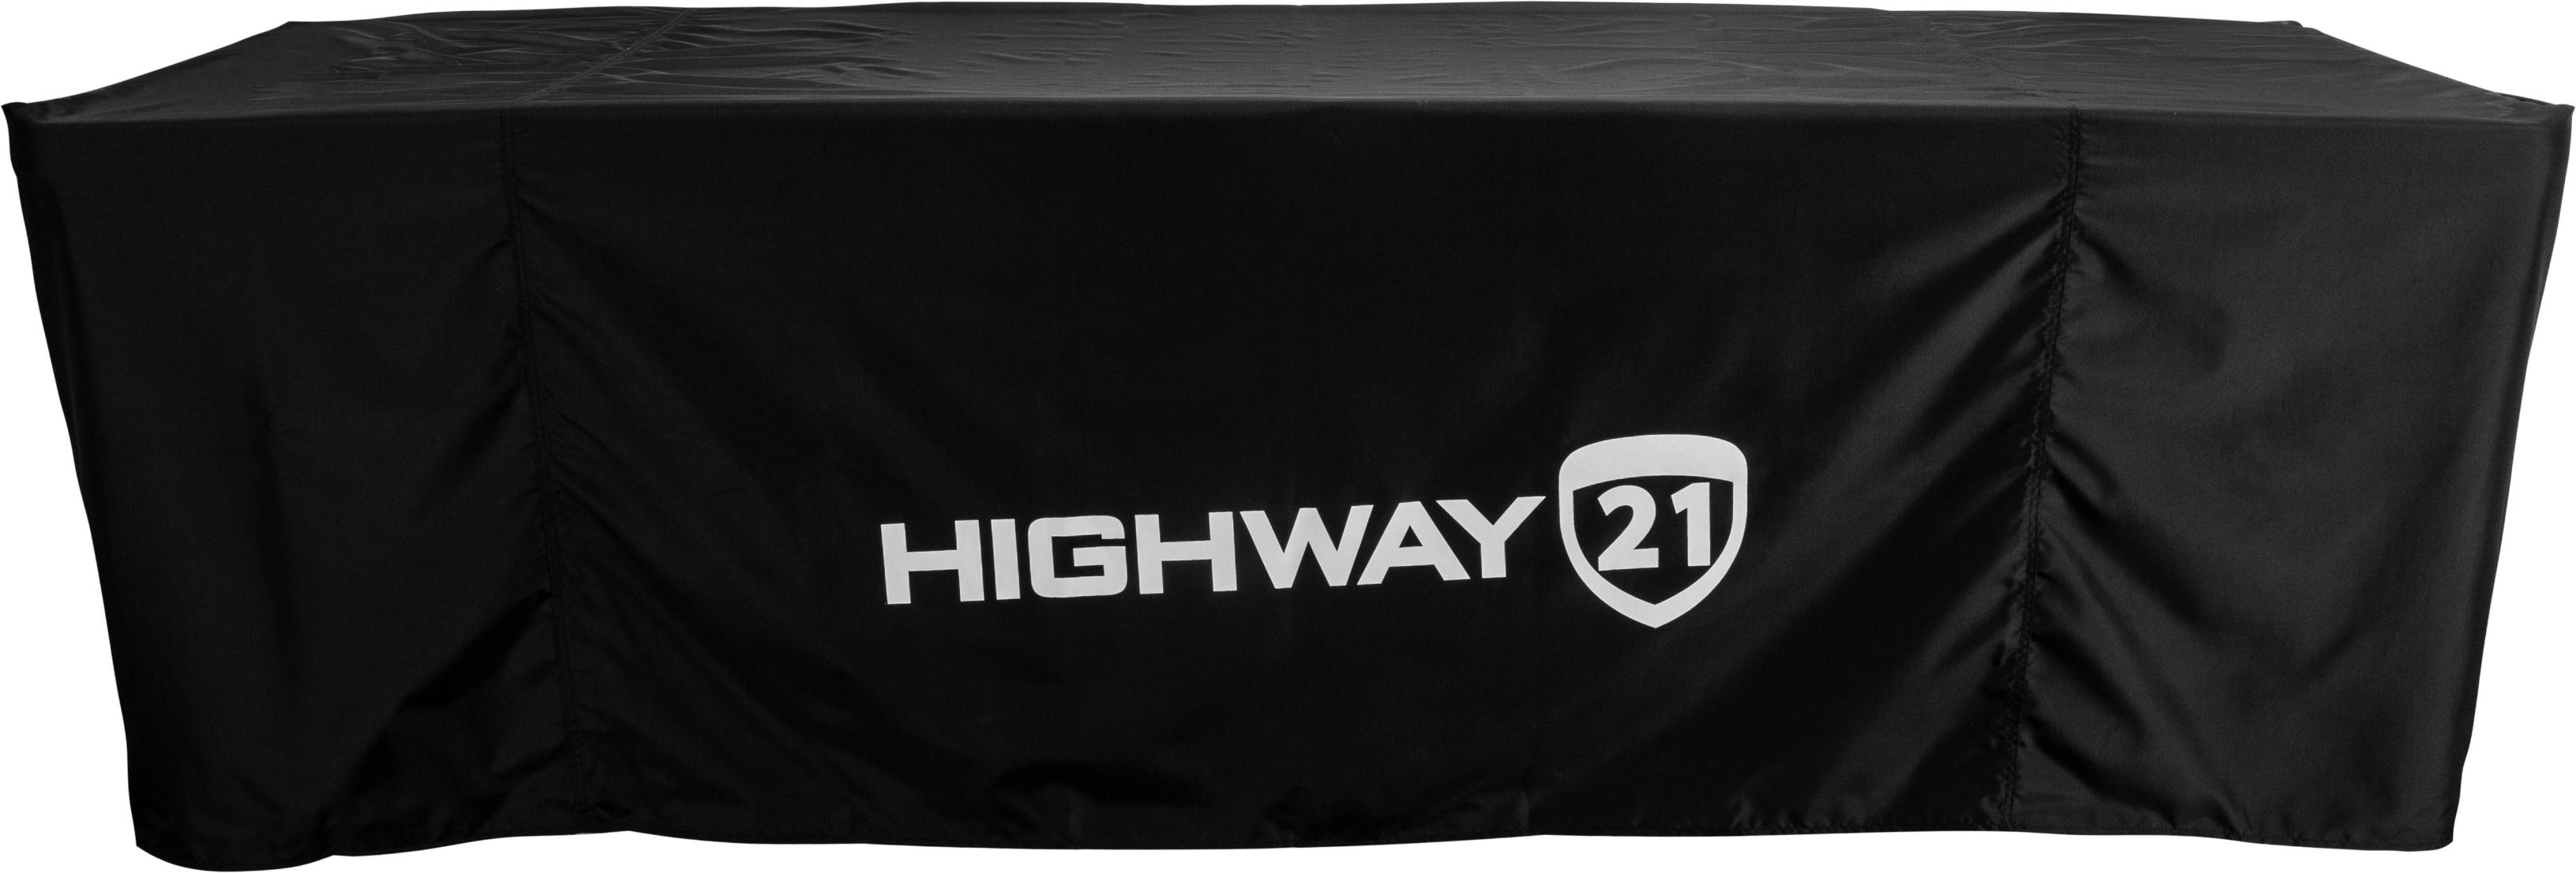 Highway 21 - Convertible Table - 489-9906